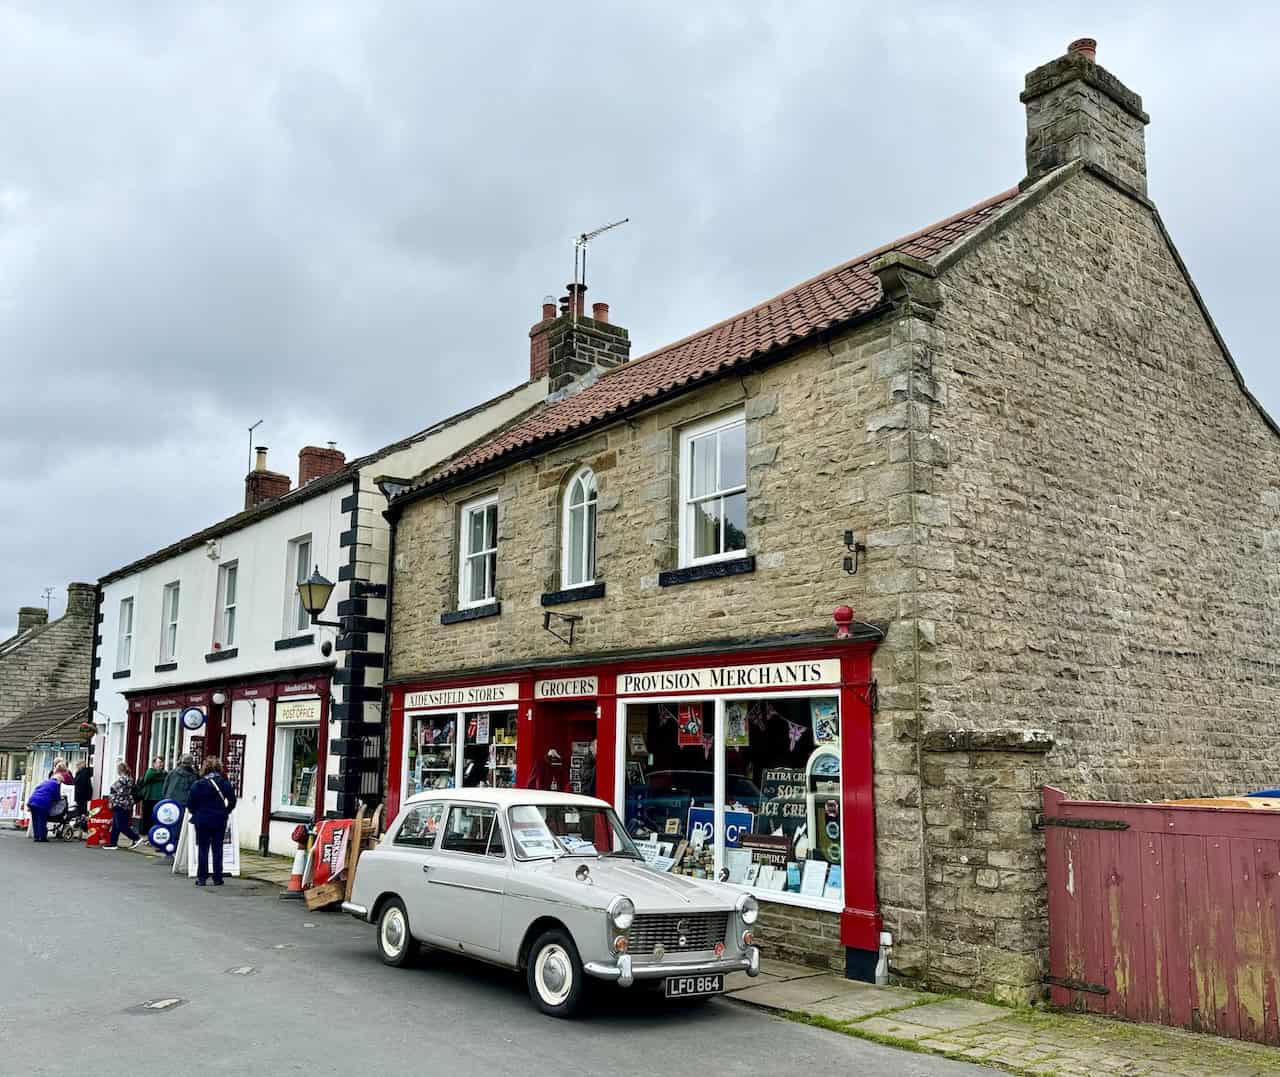 Aidensfield Stores, a notable Heartbeat filming location with a red and cream exterior, seen on the Grosmont to Goathland walk.